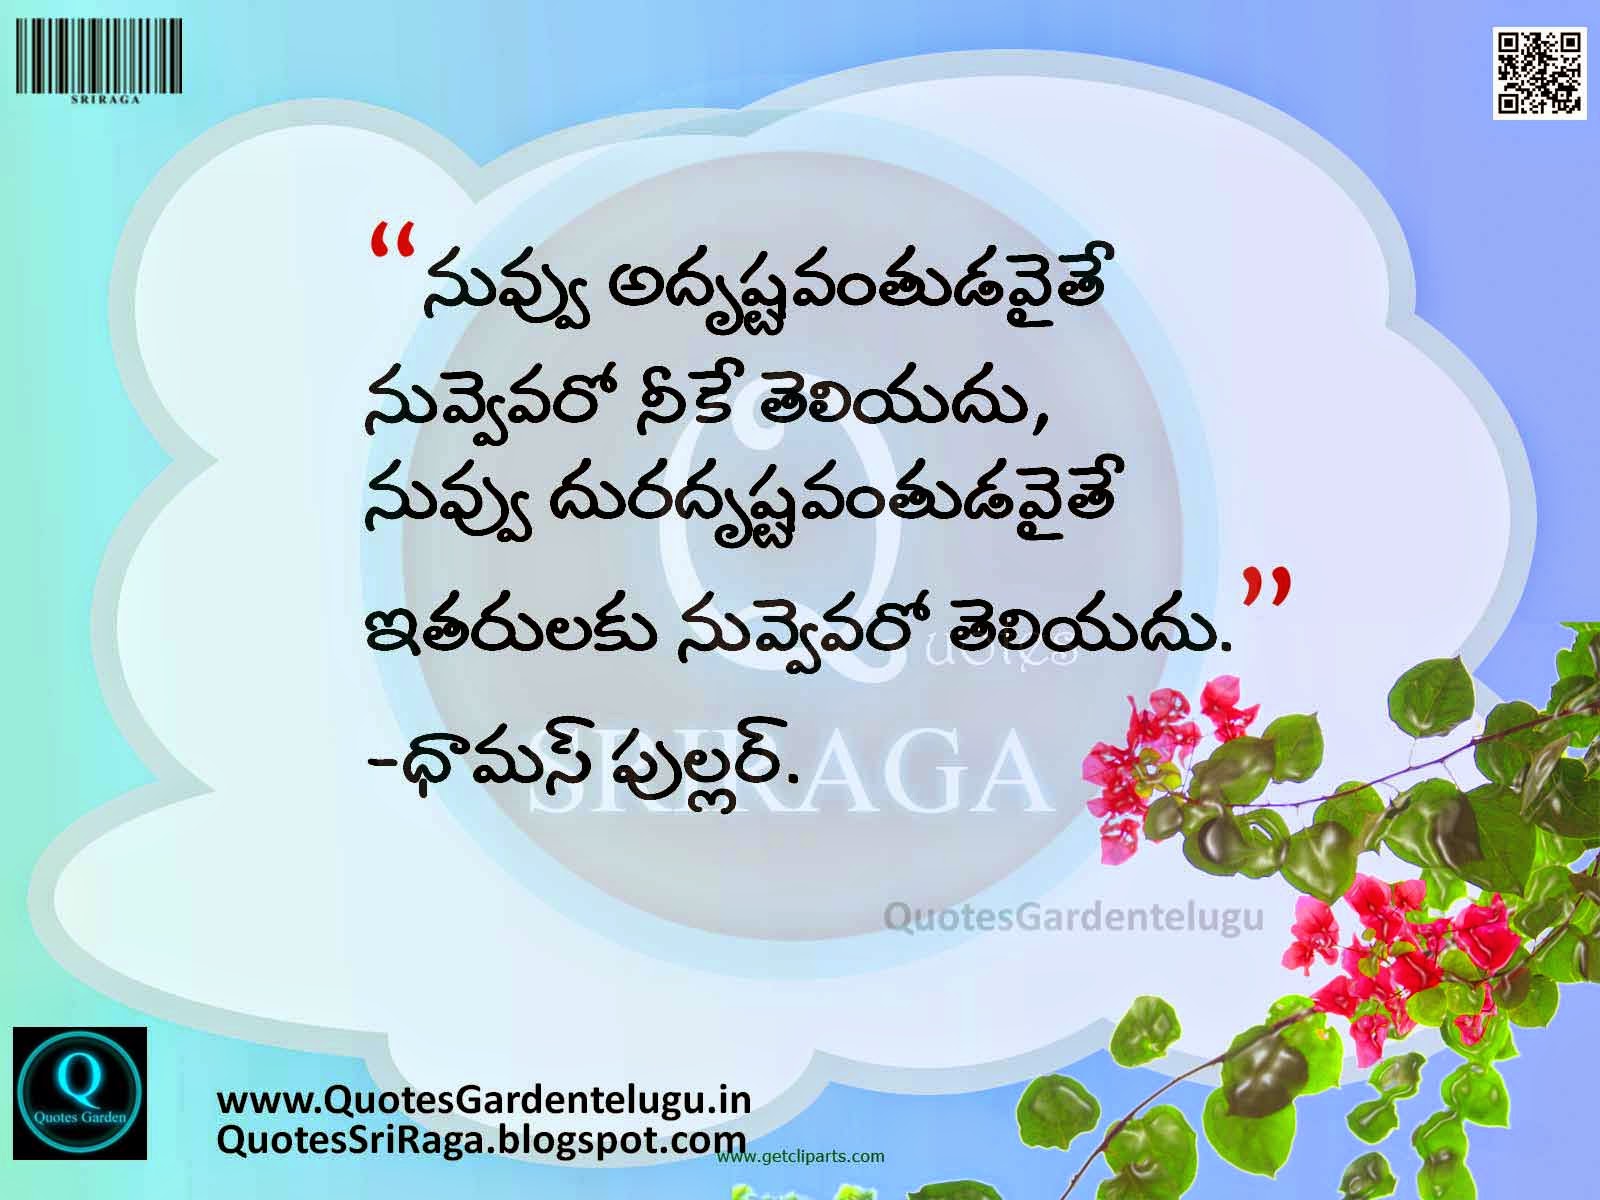 Best Telugu Good Reads Telugu with Beautiful images Hdwallpapers Inspirational with HDimages Telugu Quotes images